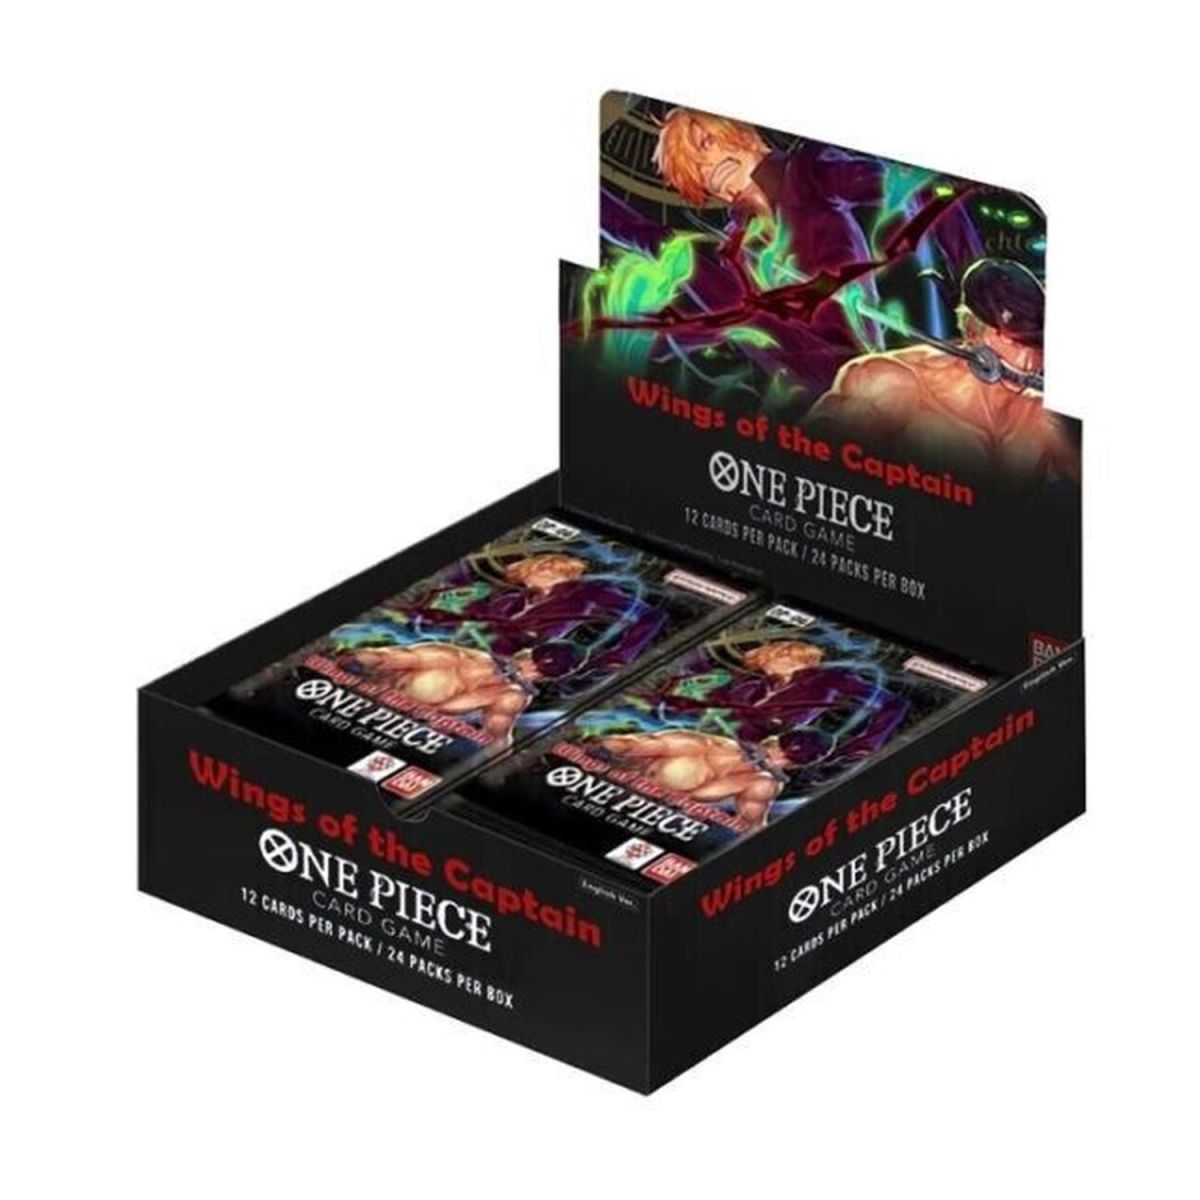 One Piece - Display - Box of 24 Boosters - Wings of the Captain - OP-06 - EN